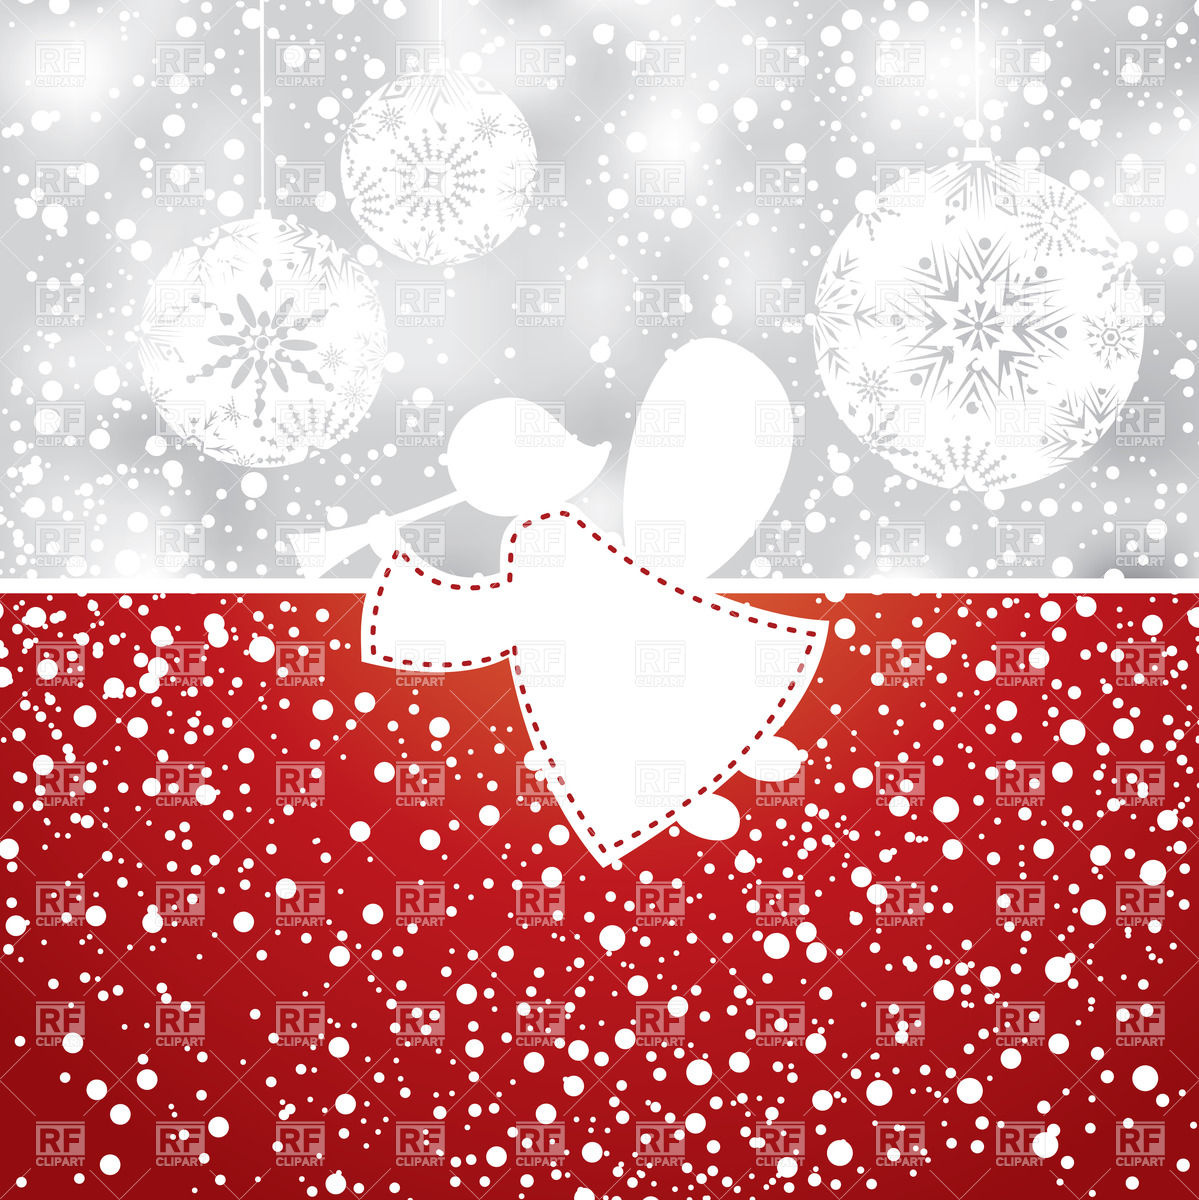 Abstract Christmas background with angel Vector Image of